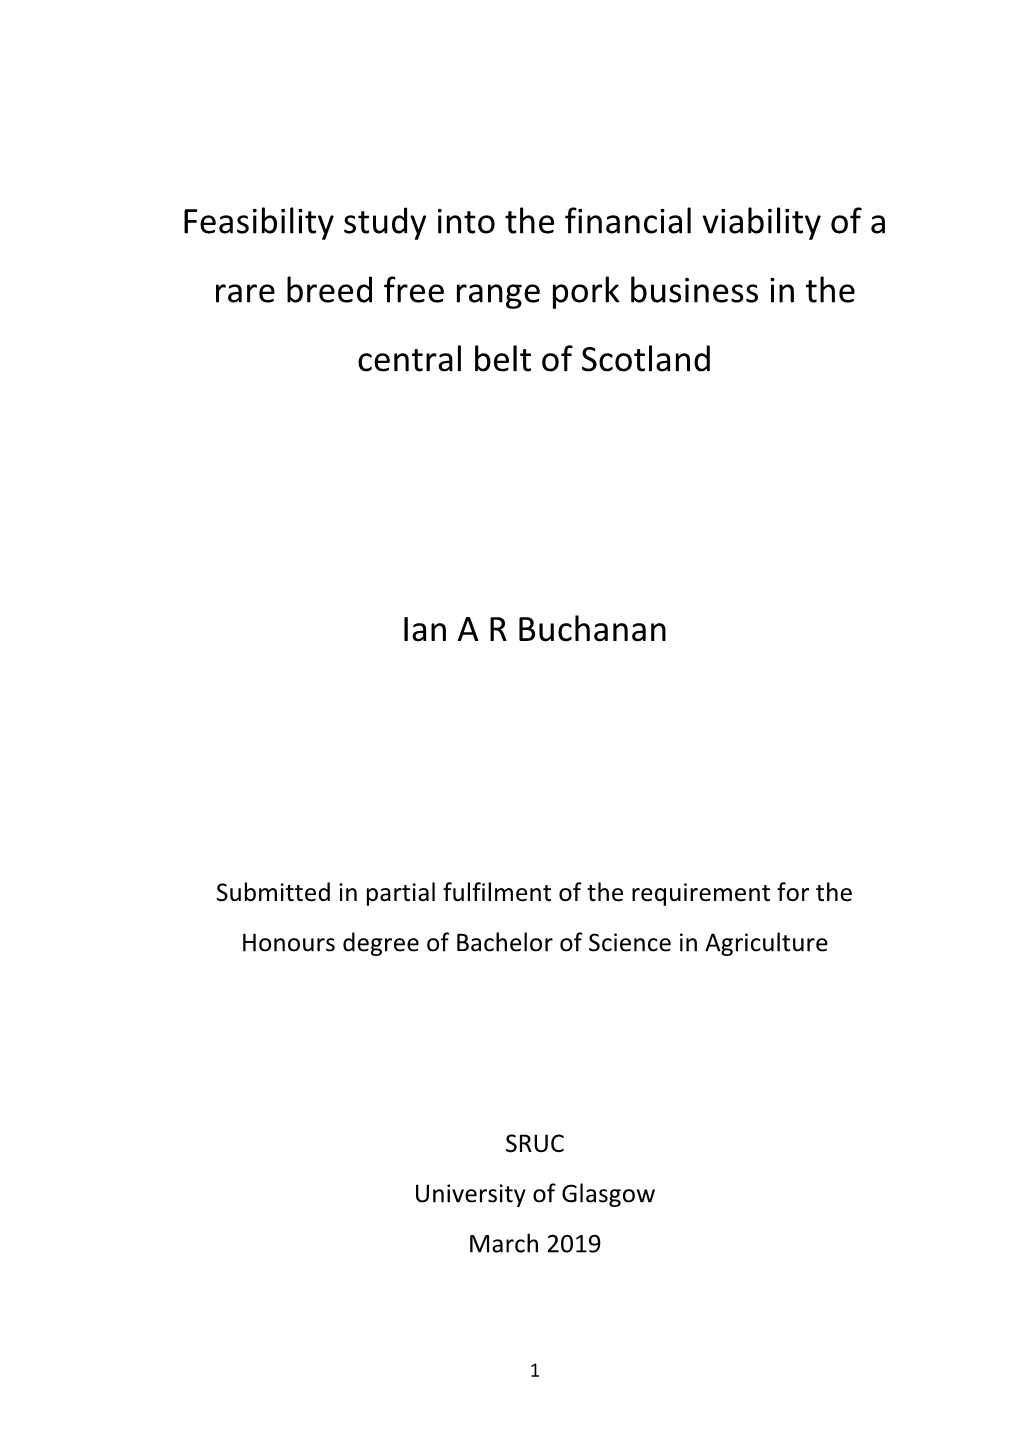 Feasibility Study Into the Financial Viability of a Rare Breed Free Range Pork Business in the Central Belt of Scotland